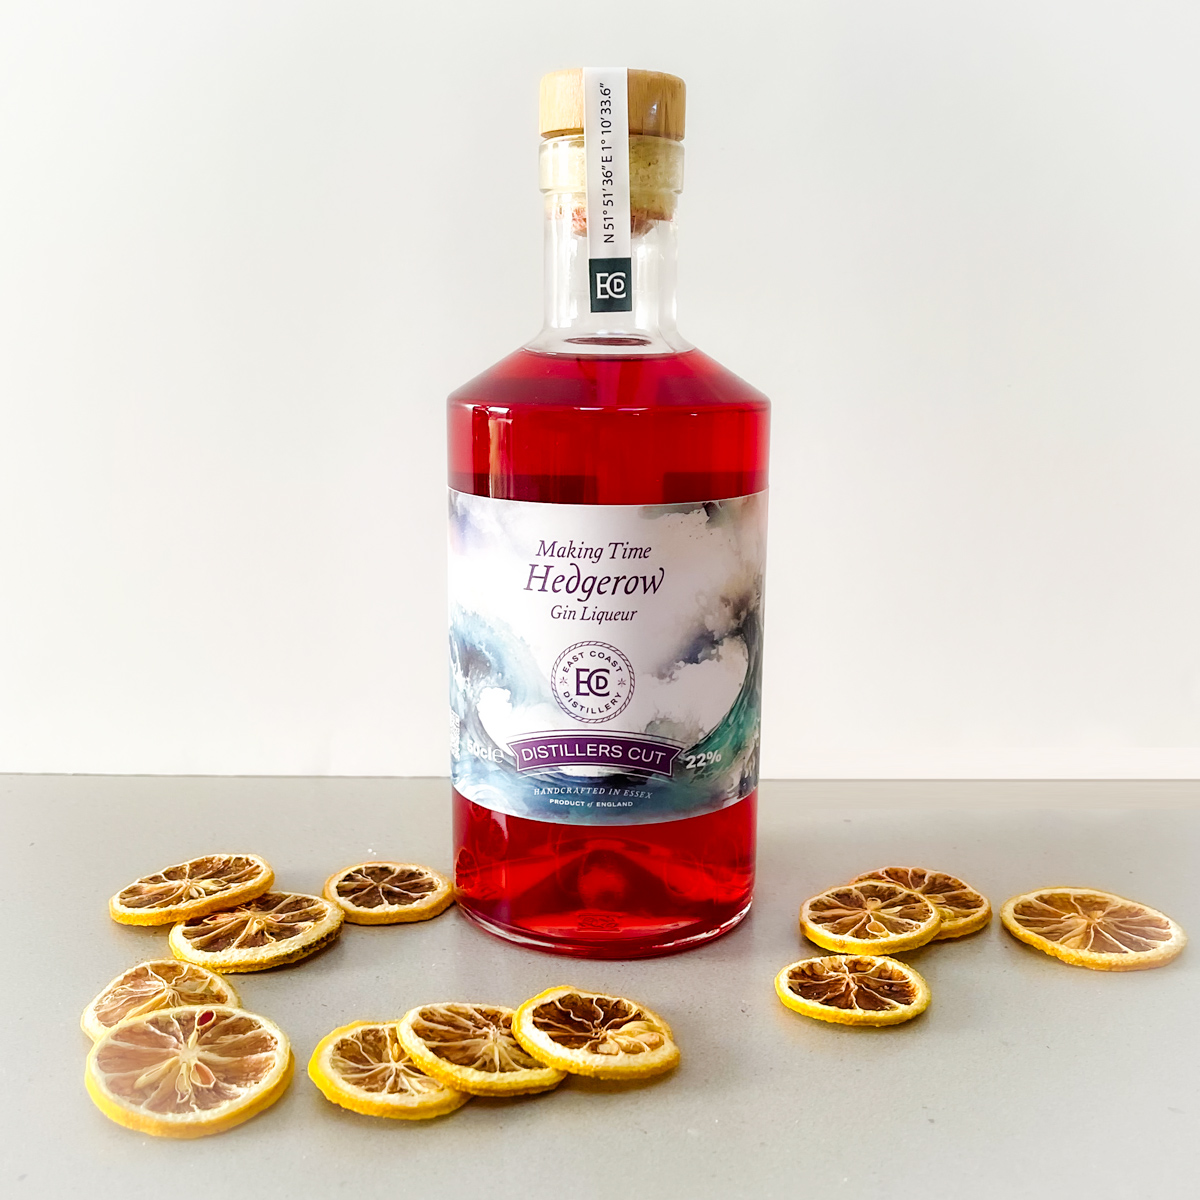 Bottle of Hedgerow Gin Liqueur with dried fruit